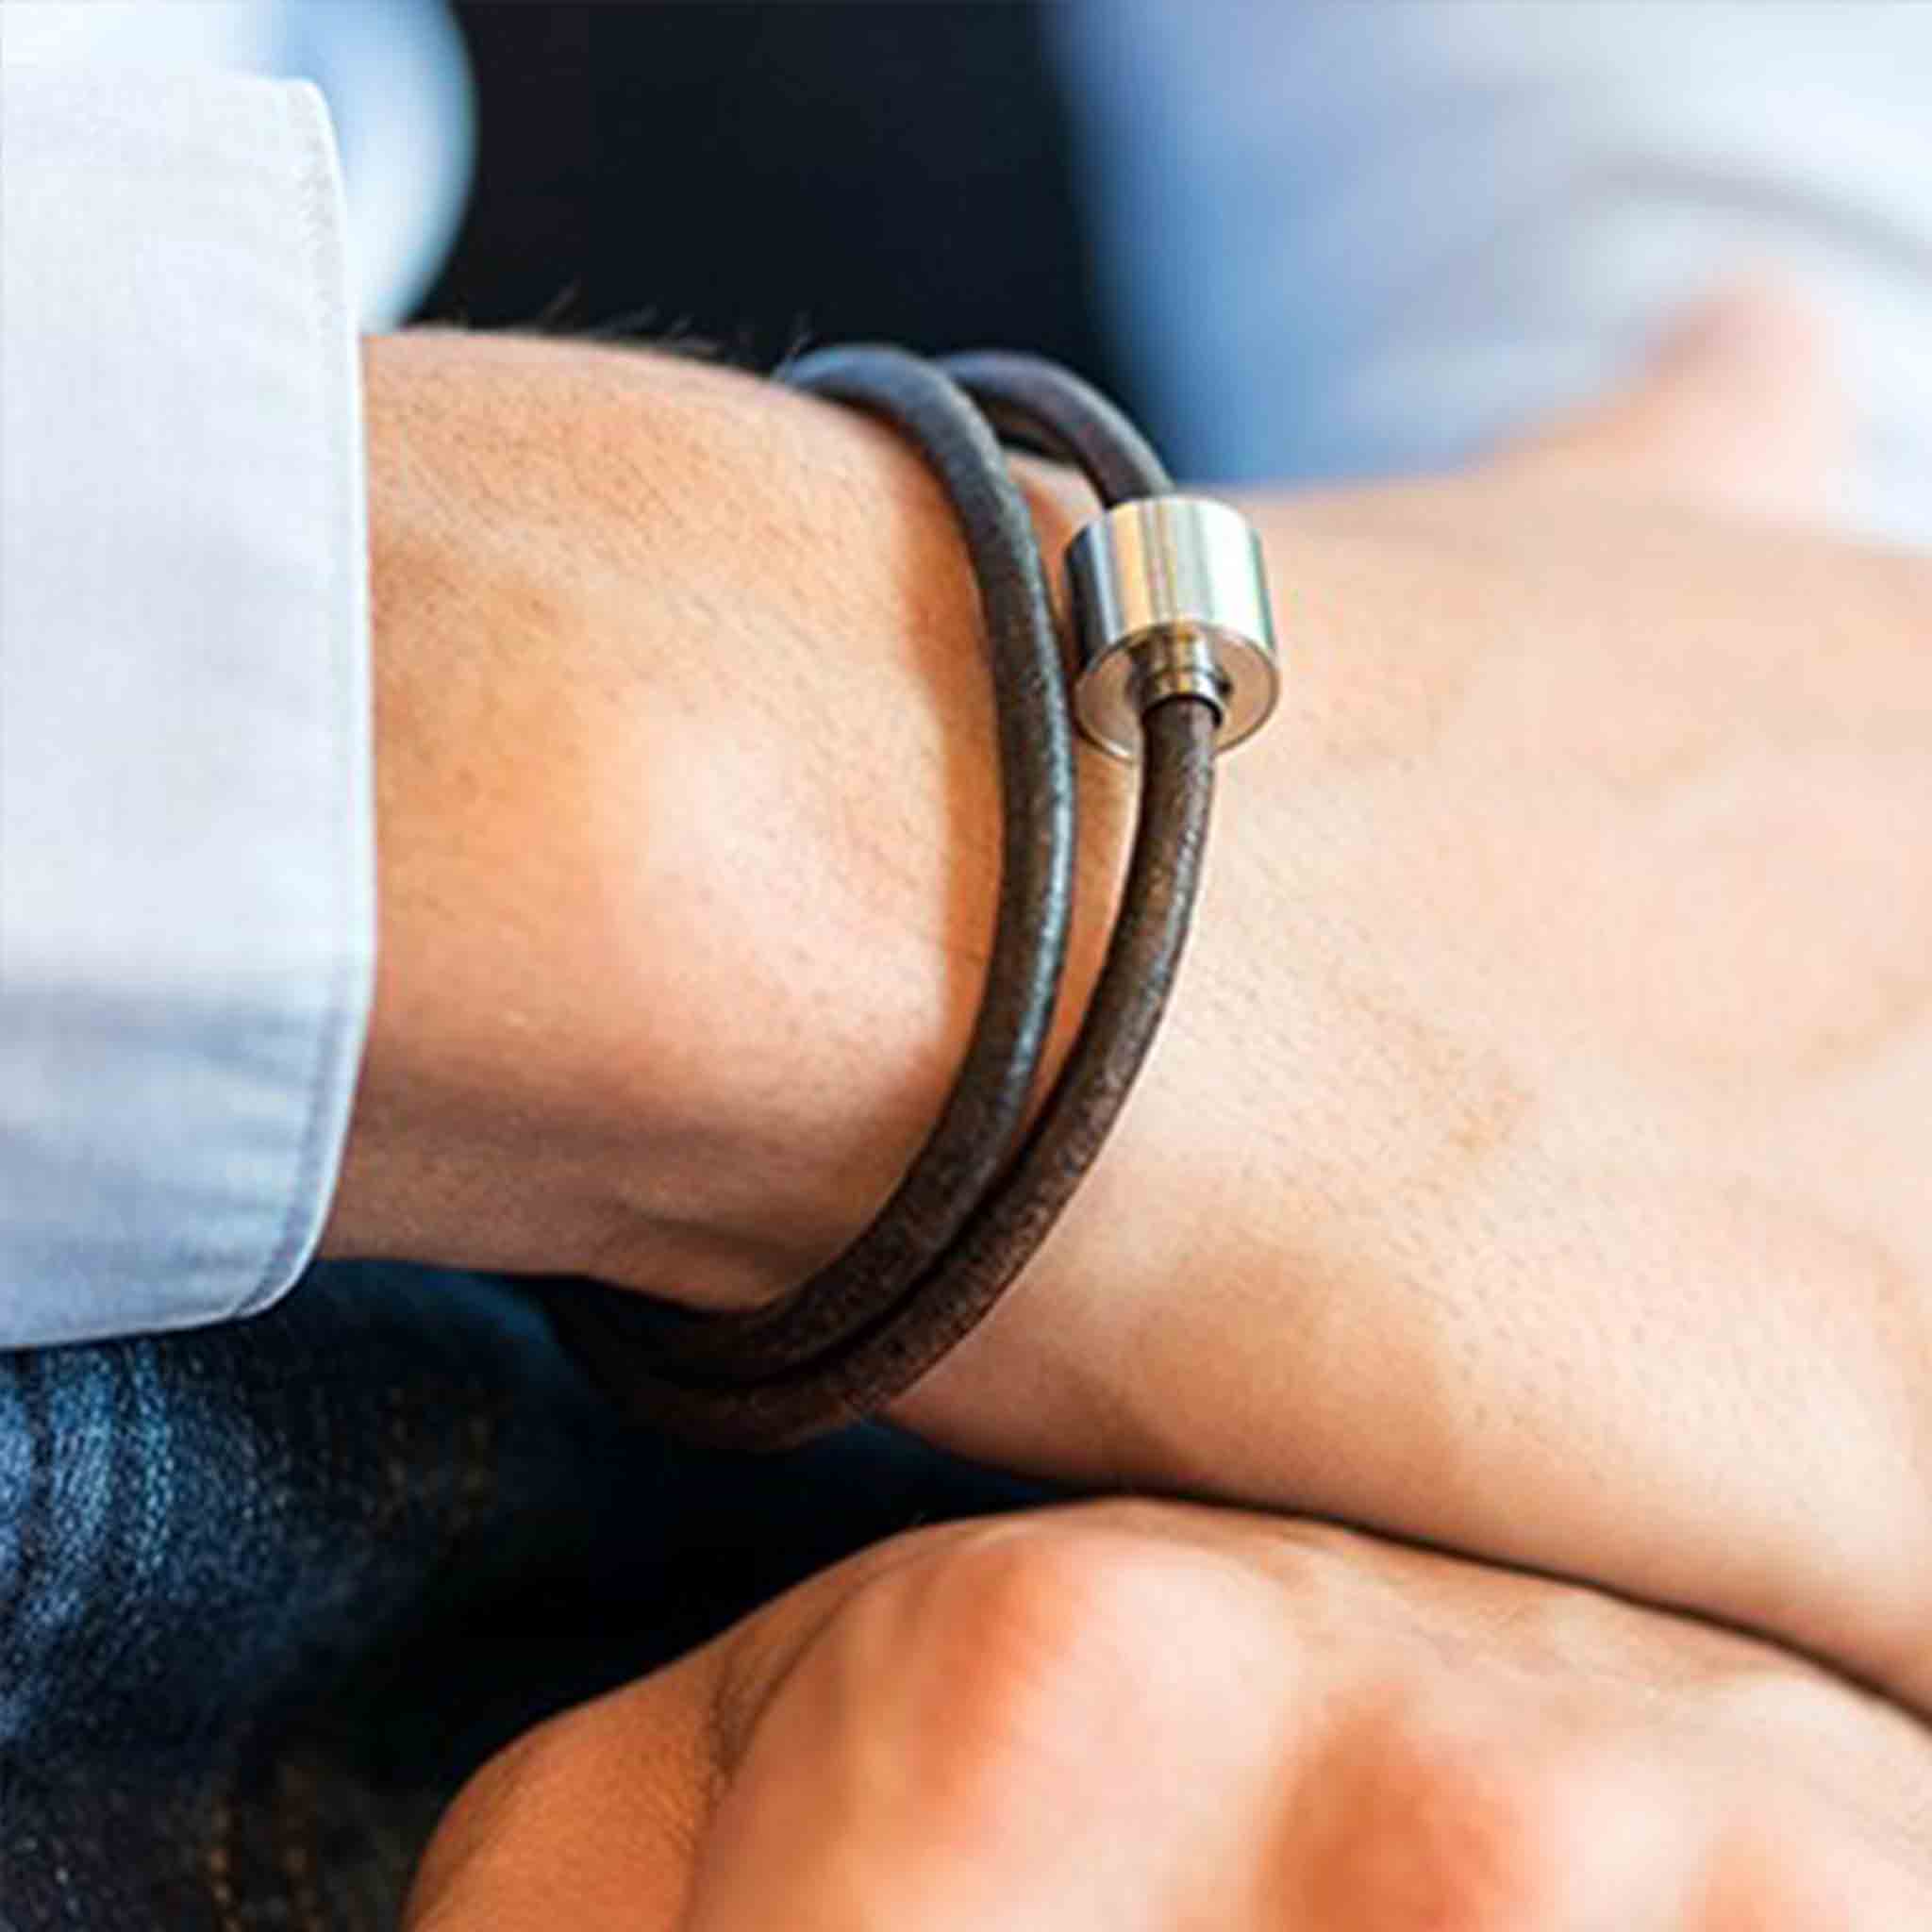 Leather Ashes Bracelet for Men in Brown on Wrist